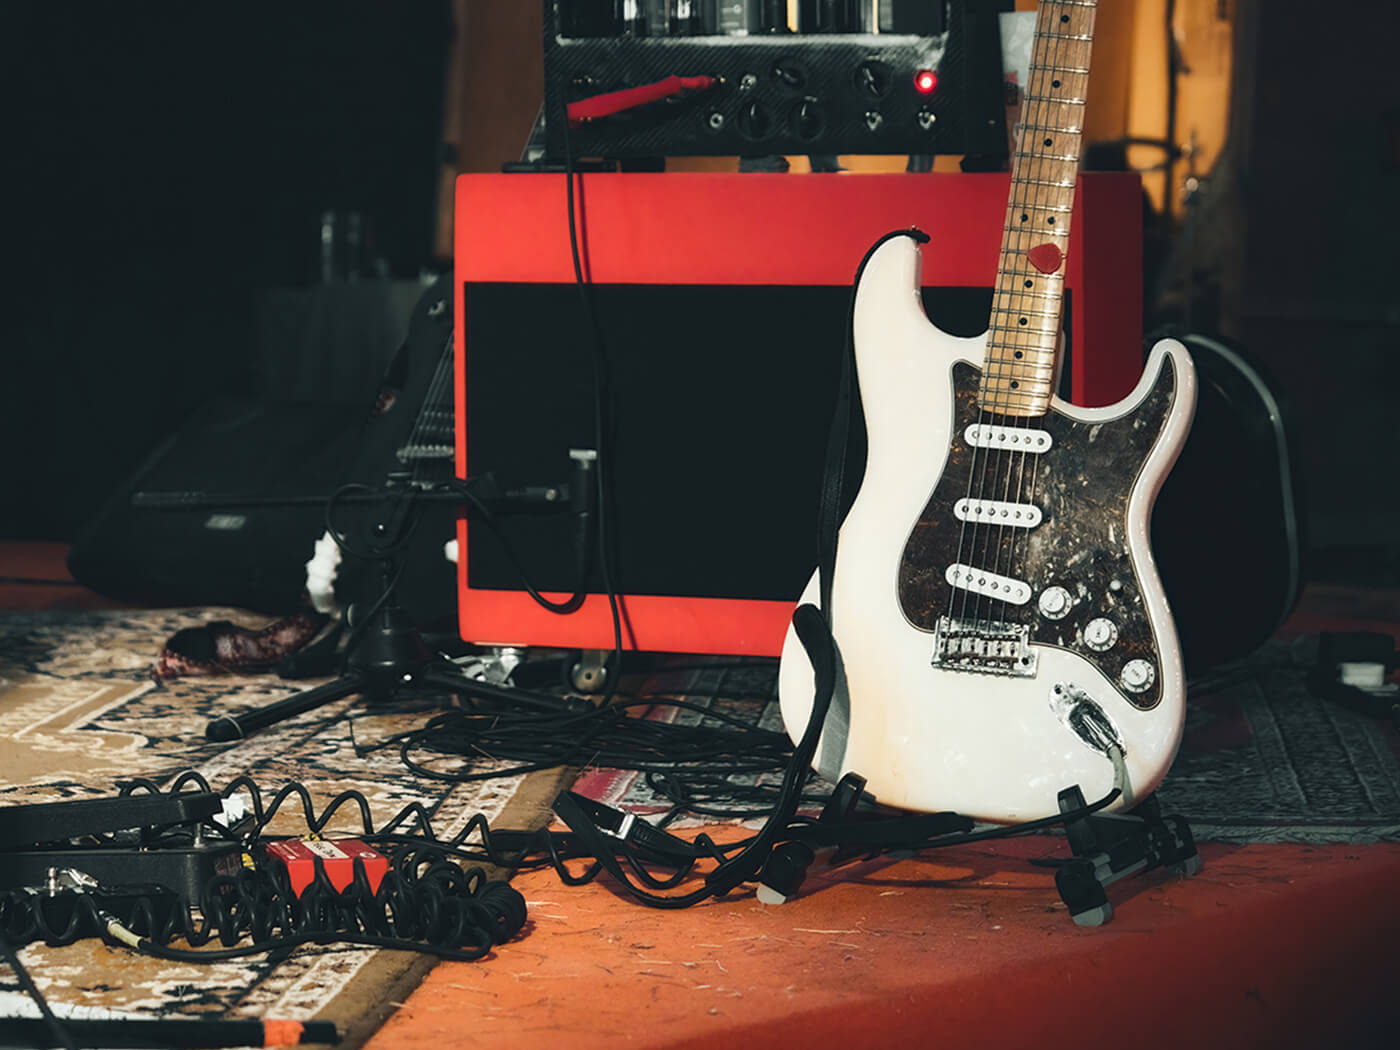 A white electric guitar and a red amplifier onstage surrounded by cables and effects pedals, photo by Tennessee Witney/Getty Images